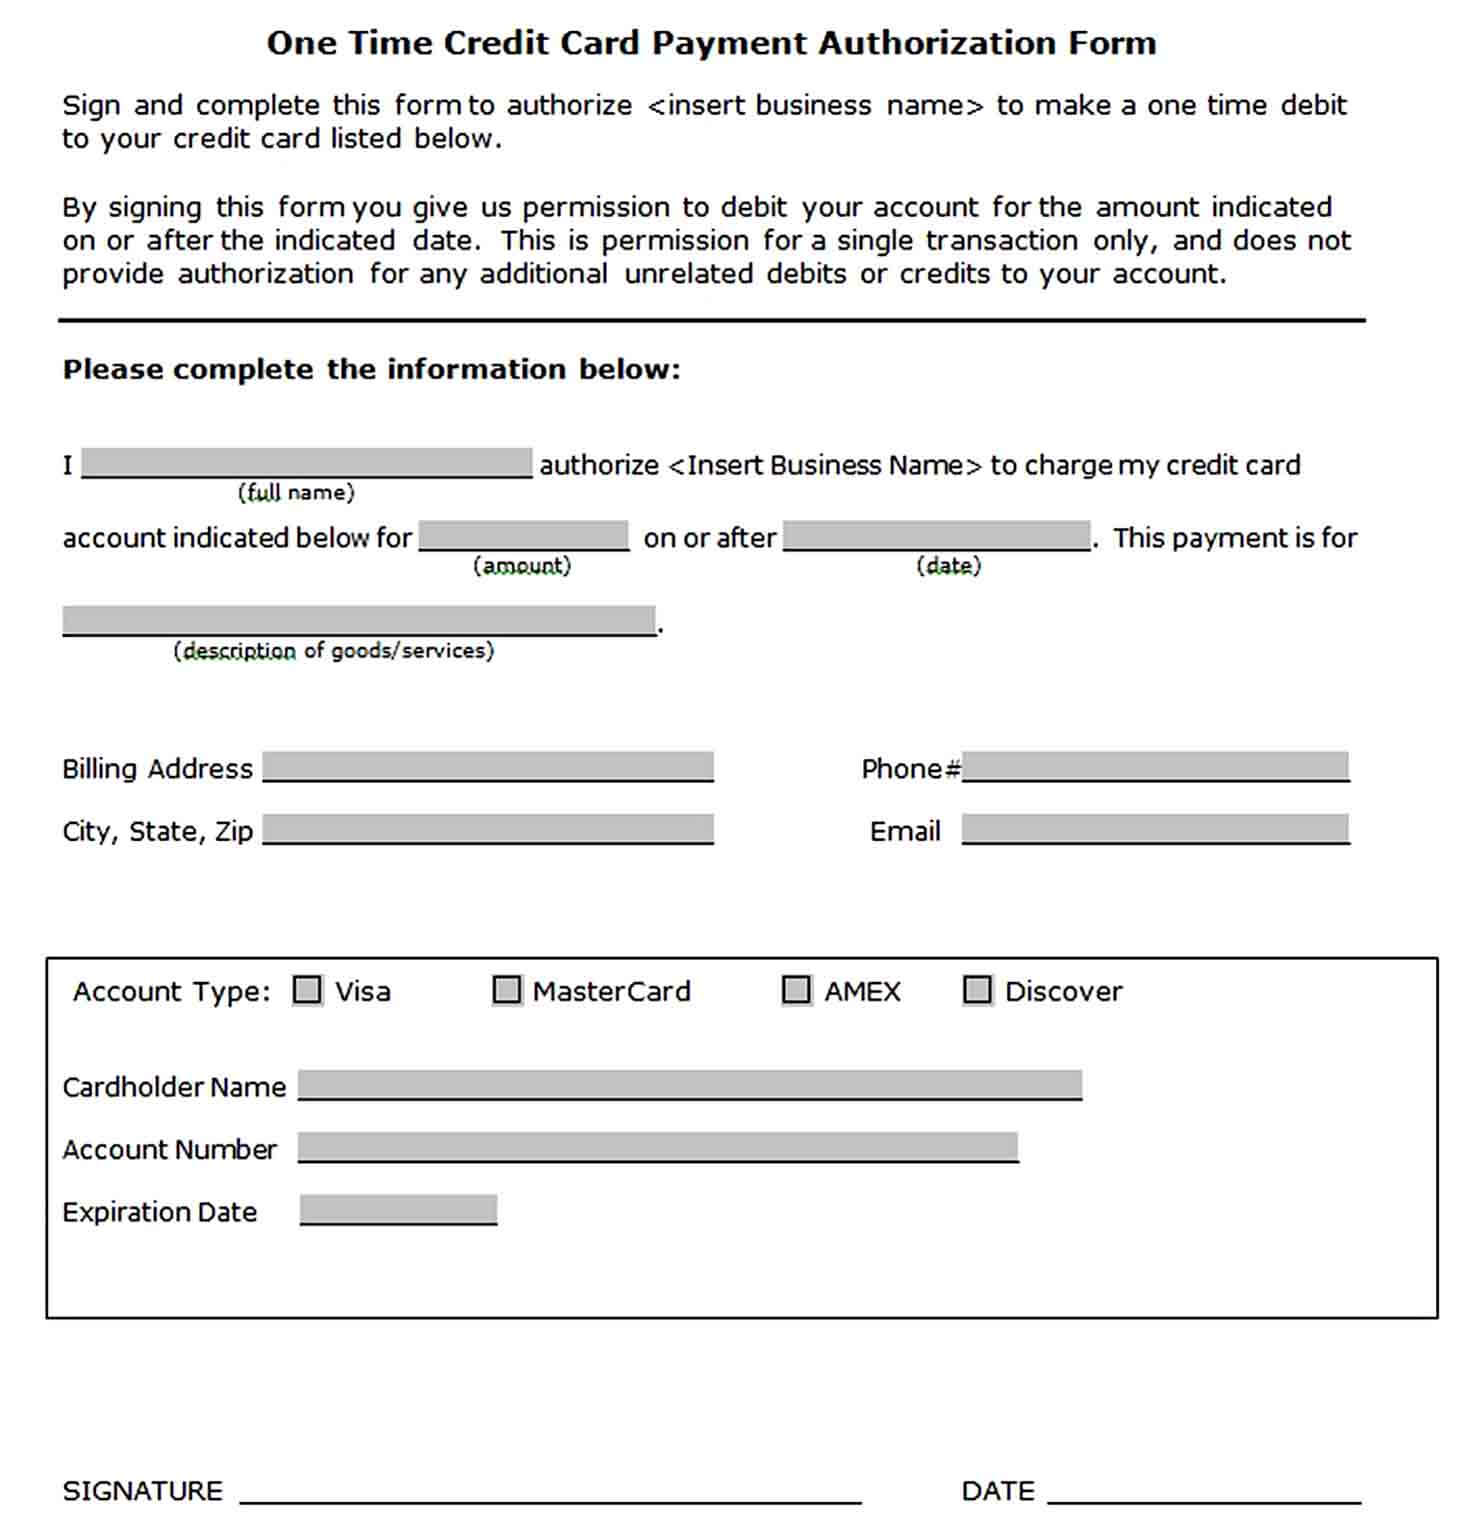 One Time Credit Card Payment Authorization Form Template